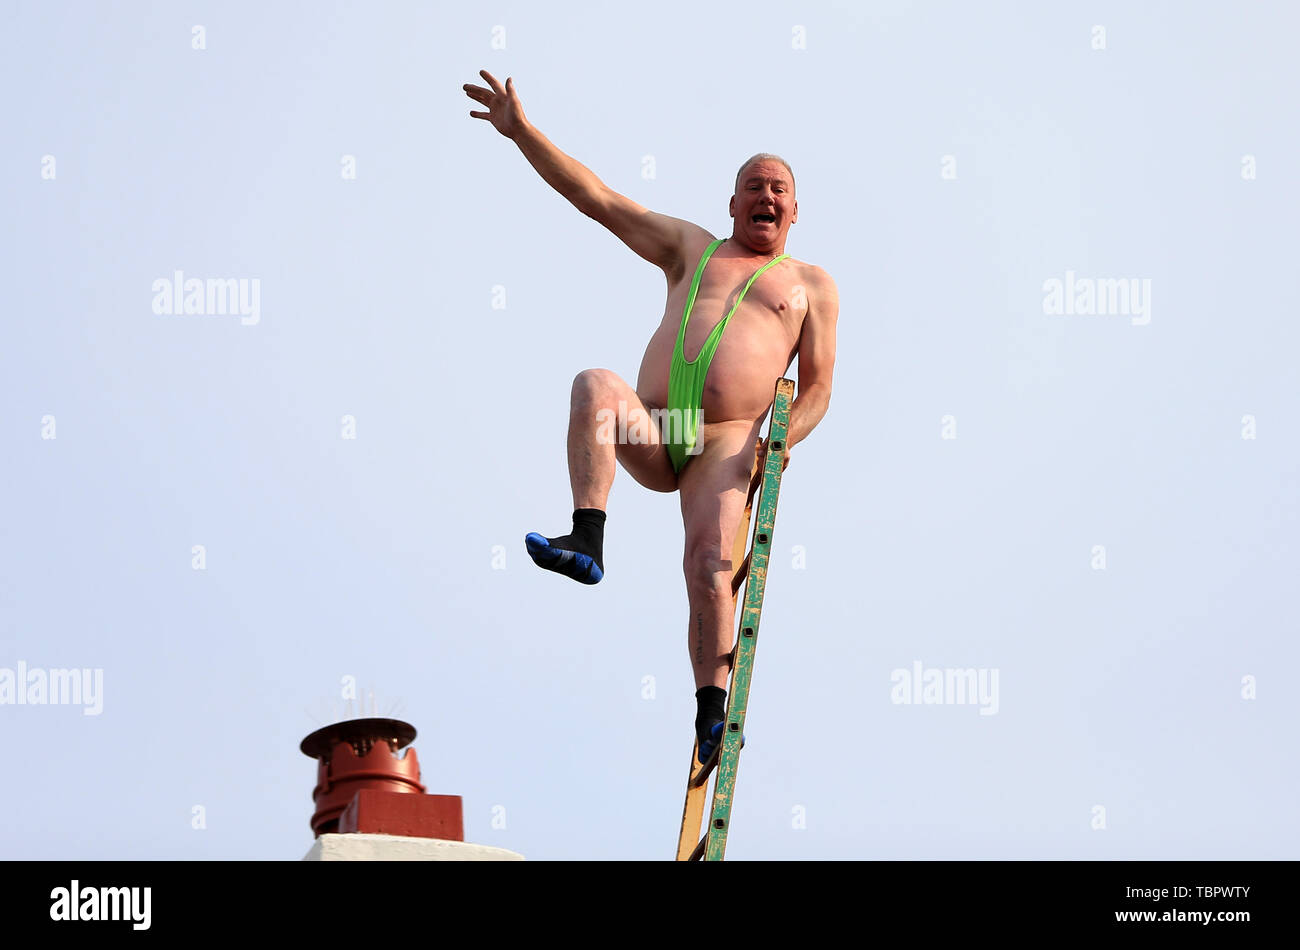 2nd June 2019, Liverpool, Merseyside; Liverpool FC celebration parade after their Champions League final win over Tottenham Hotspur in Madrid on 1st June; a daring fan wearing a mankini  precariously balances on a ladder above a rooftop cheers as the team bus passes Stock Photo